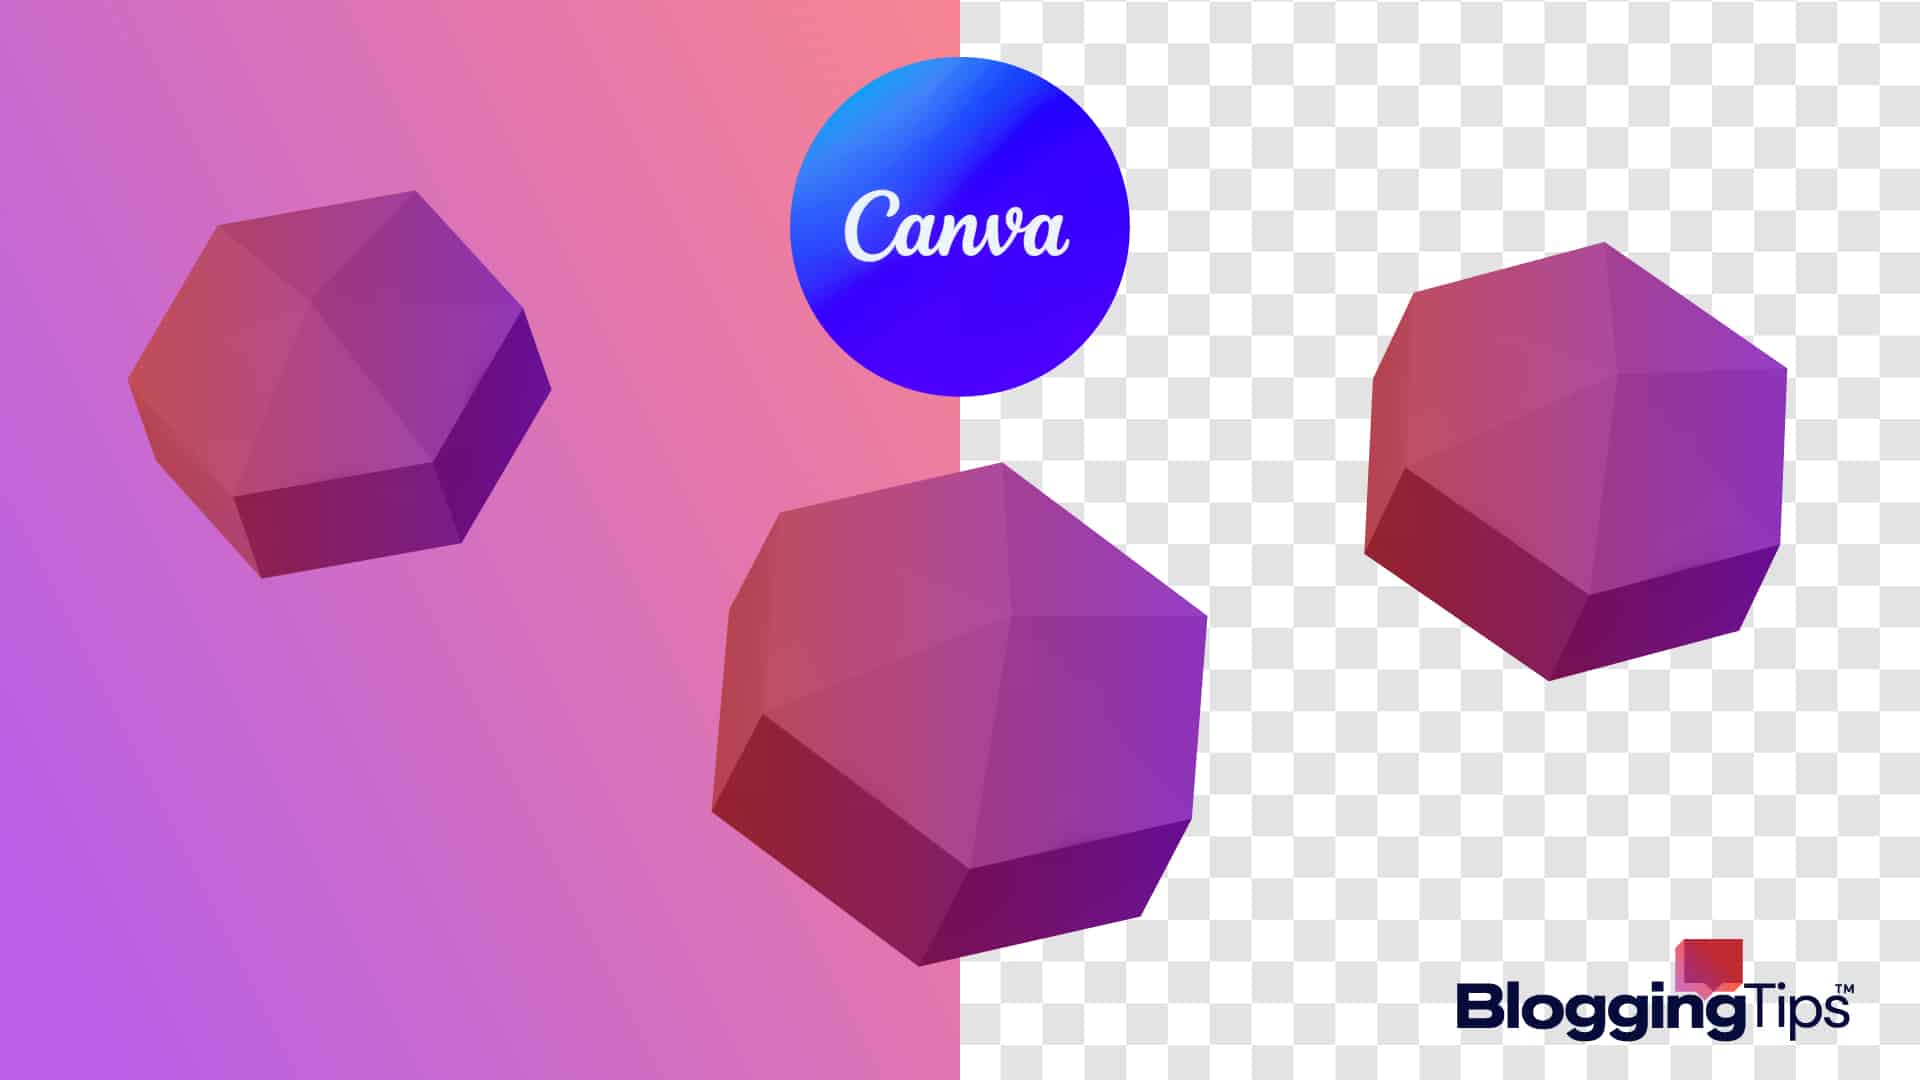 vector graphic showing an illustration of how to make a logo transparent in Canva